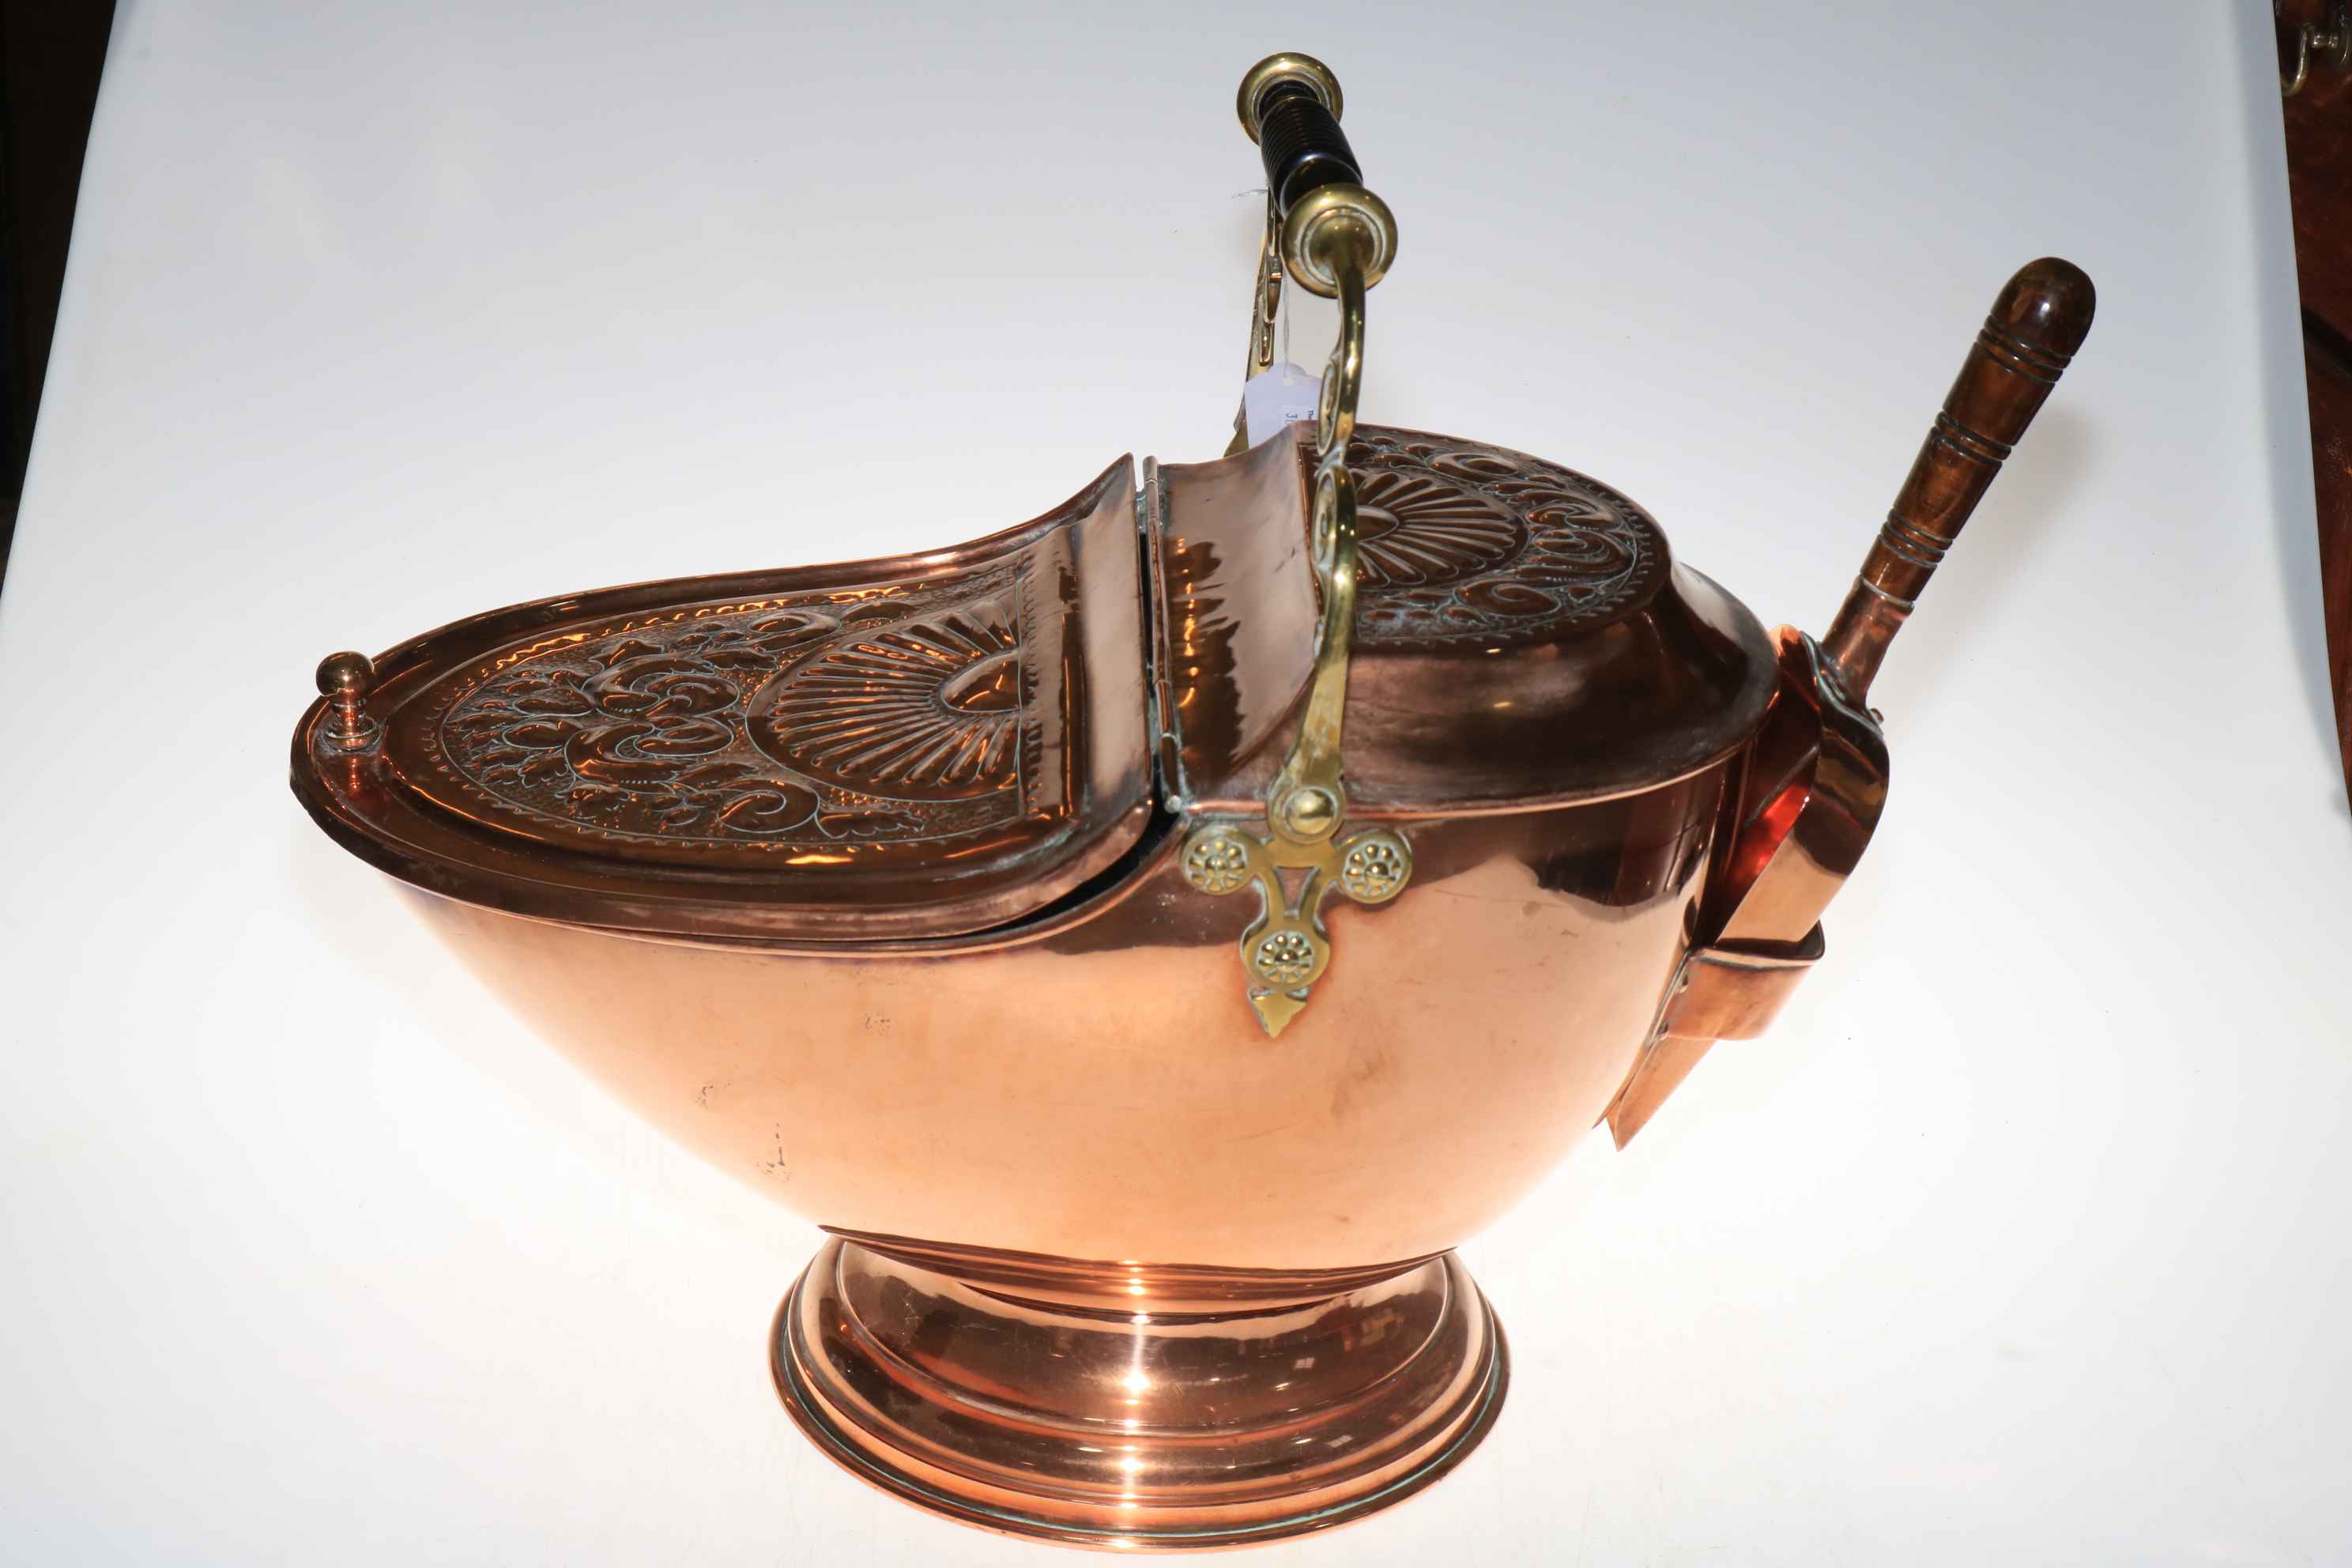 19th Century copper and brass coal scuttle with lid and shovel, with makers label for H.